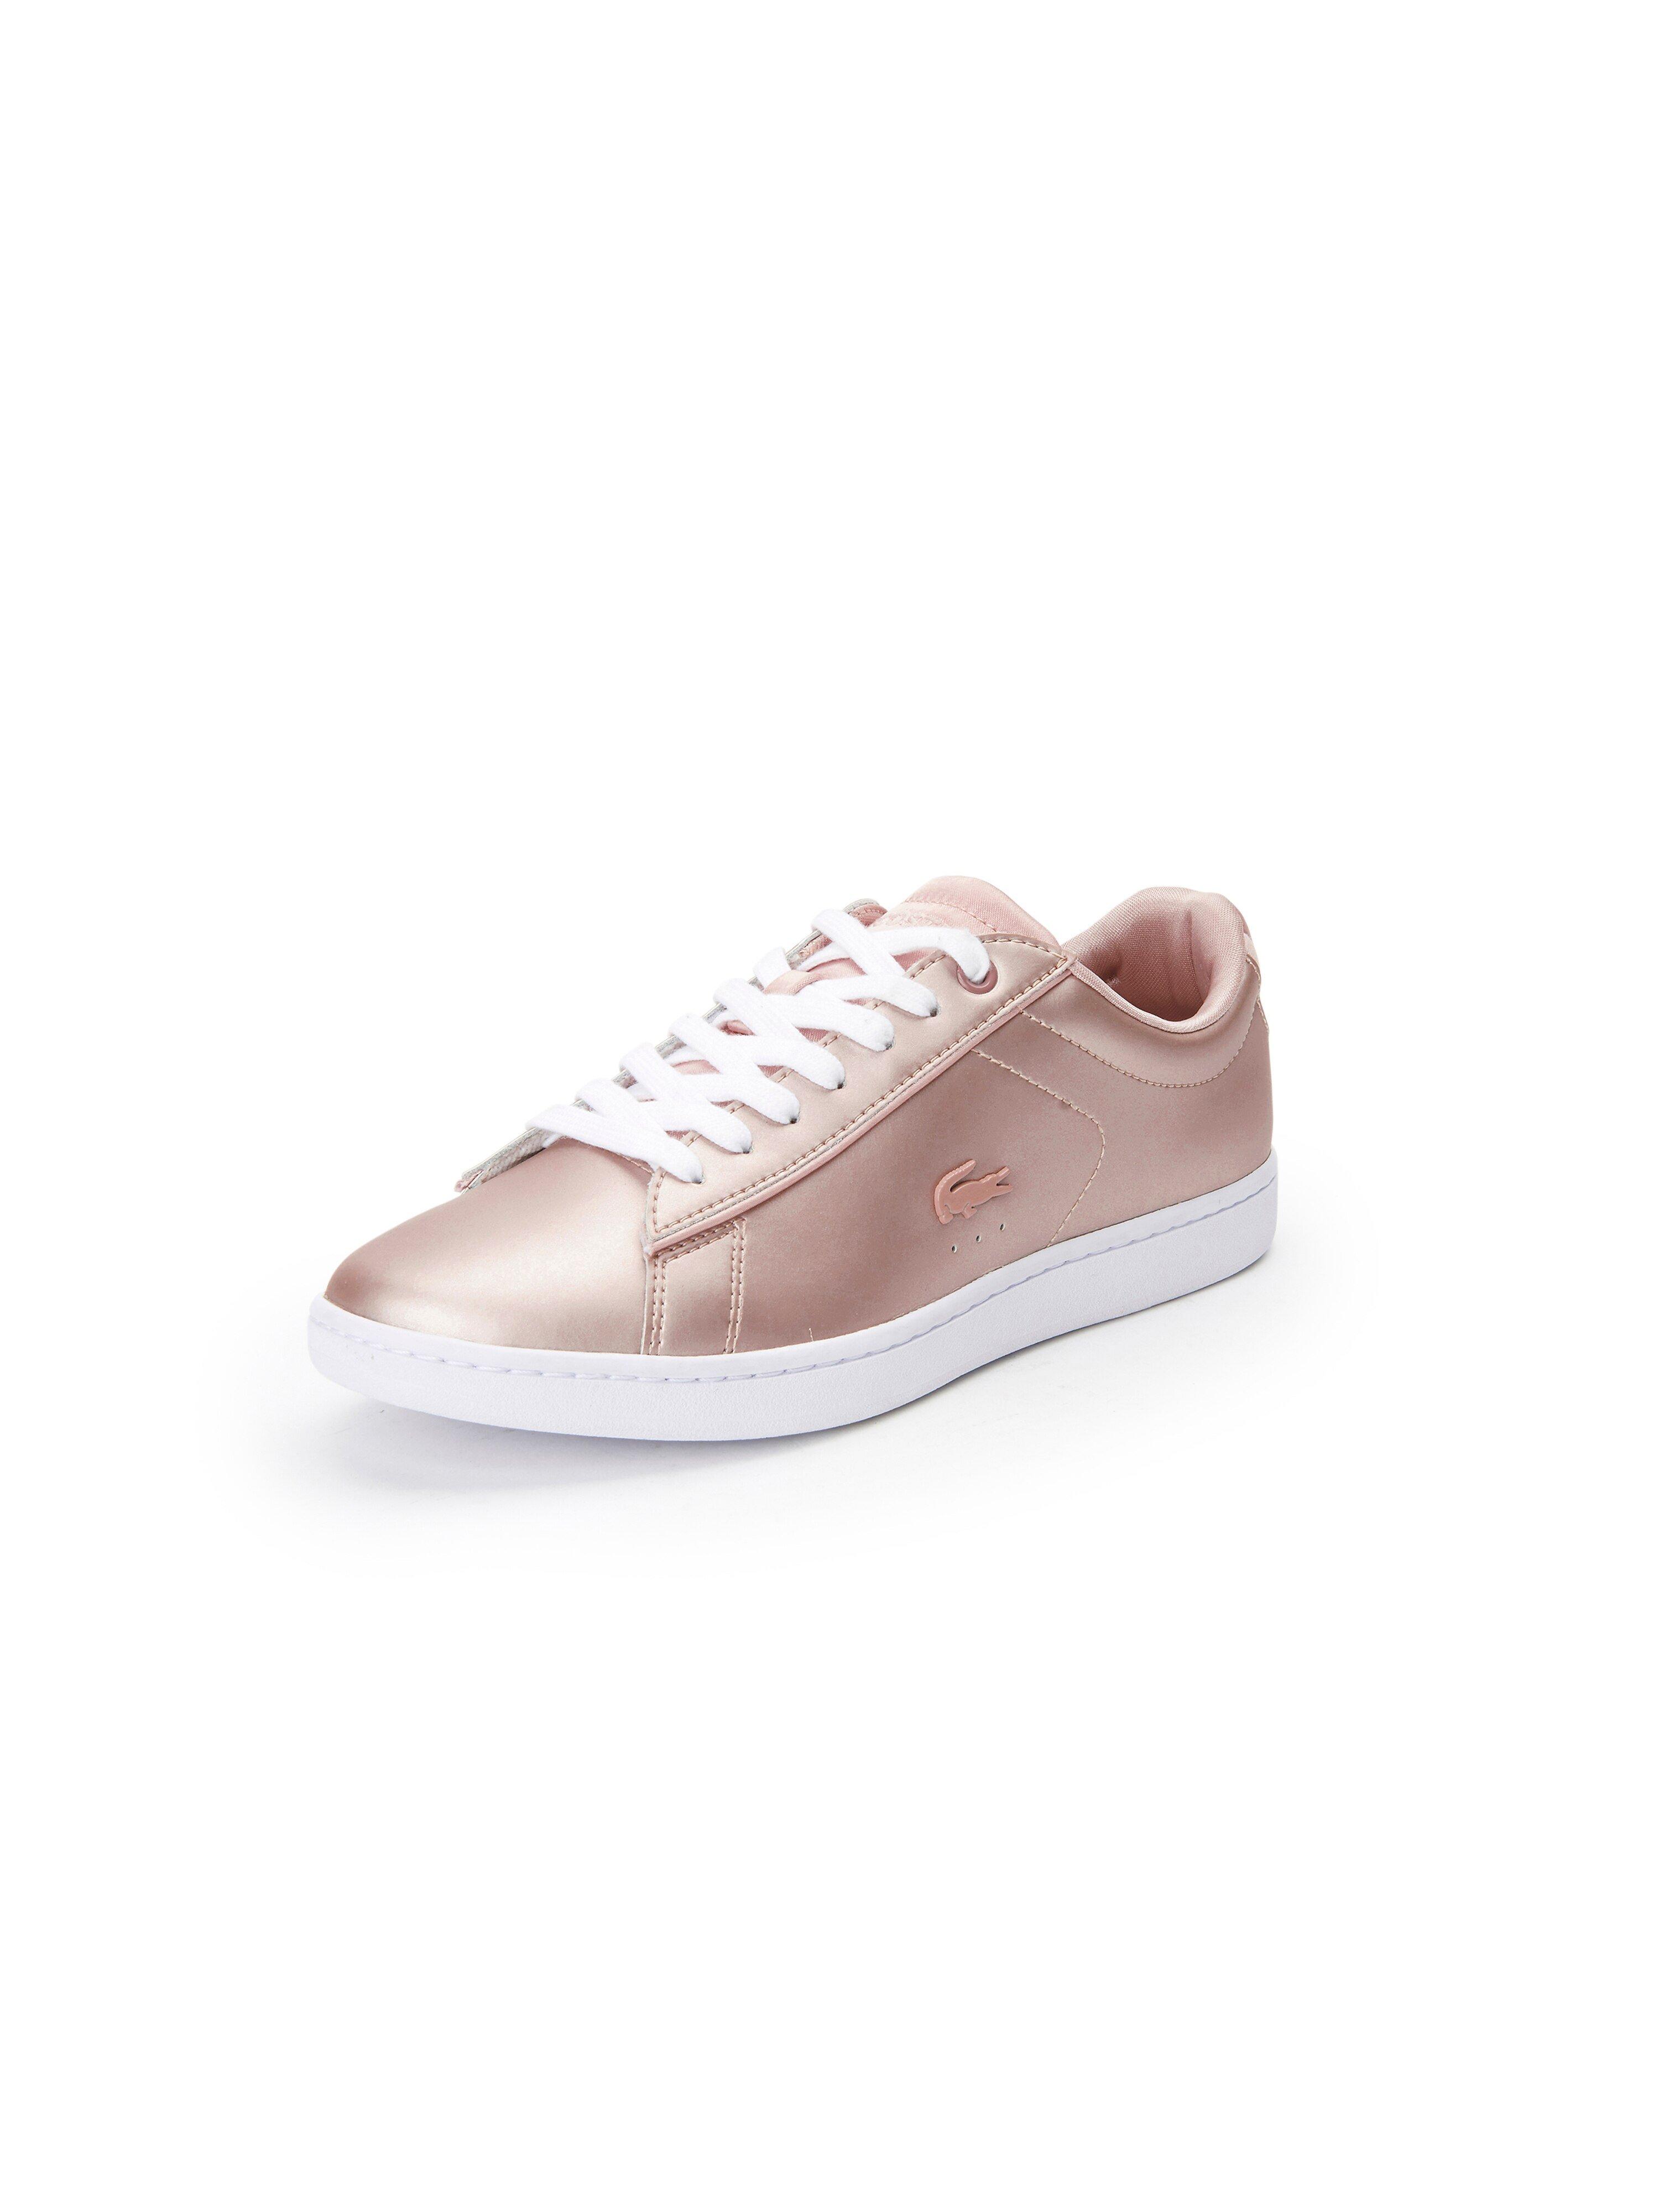 lacoste rose gold trainers